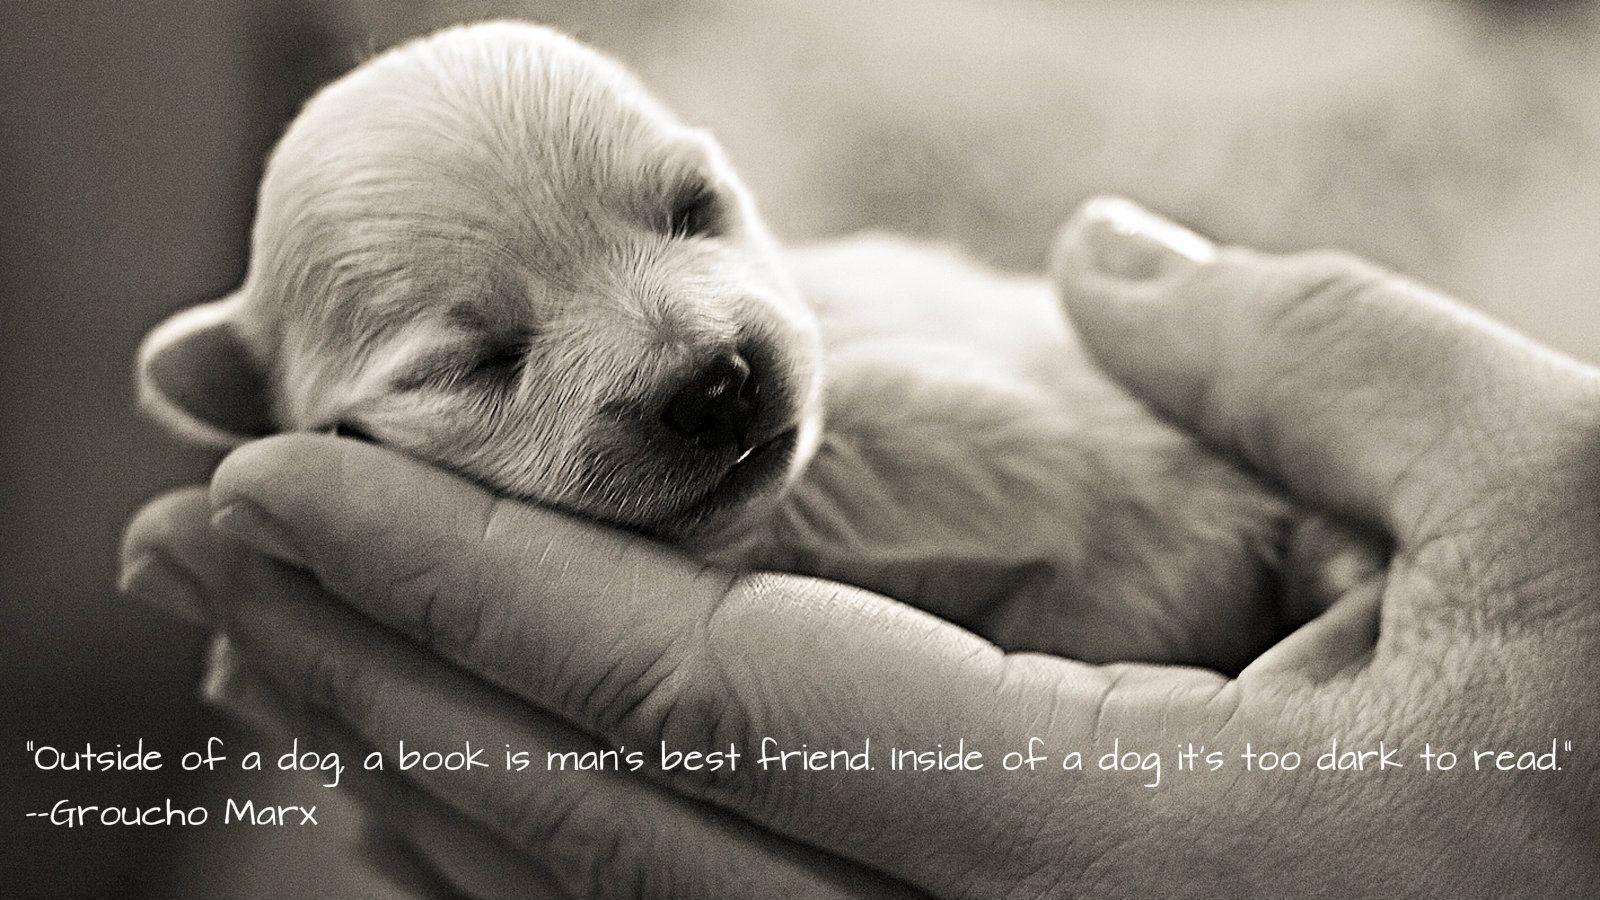 Wallpaper Quotes About Dogs. QuotesGram. Dog Quotes